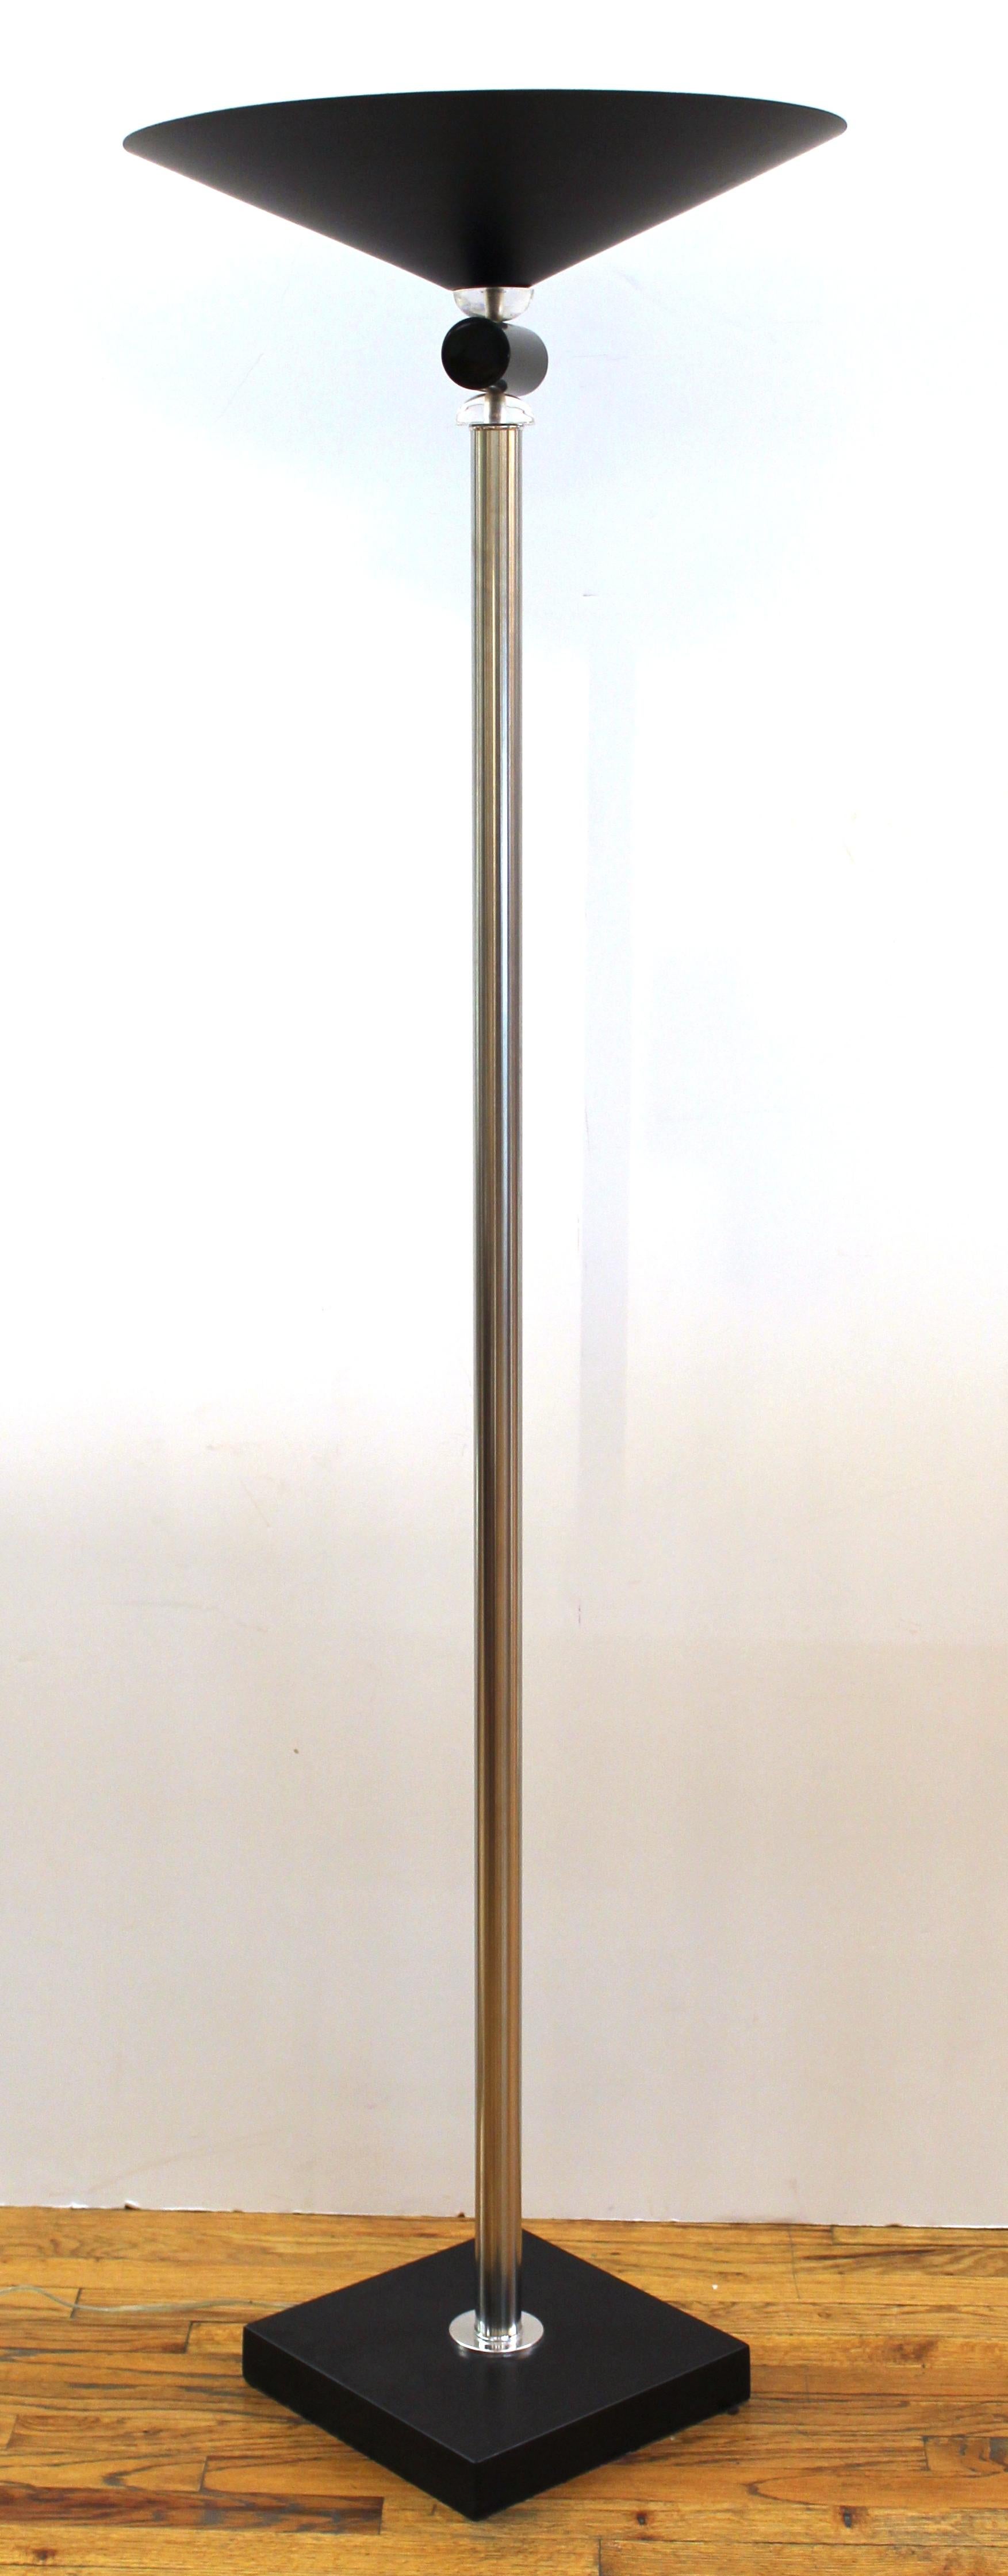 Postmodern Italian torchiere floor lamp in chrome with black enameled shade and acrylic elements.